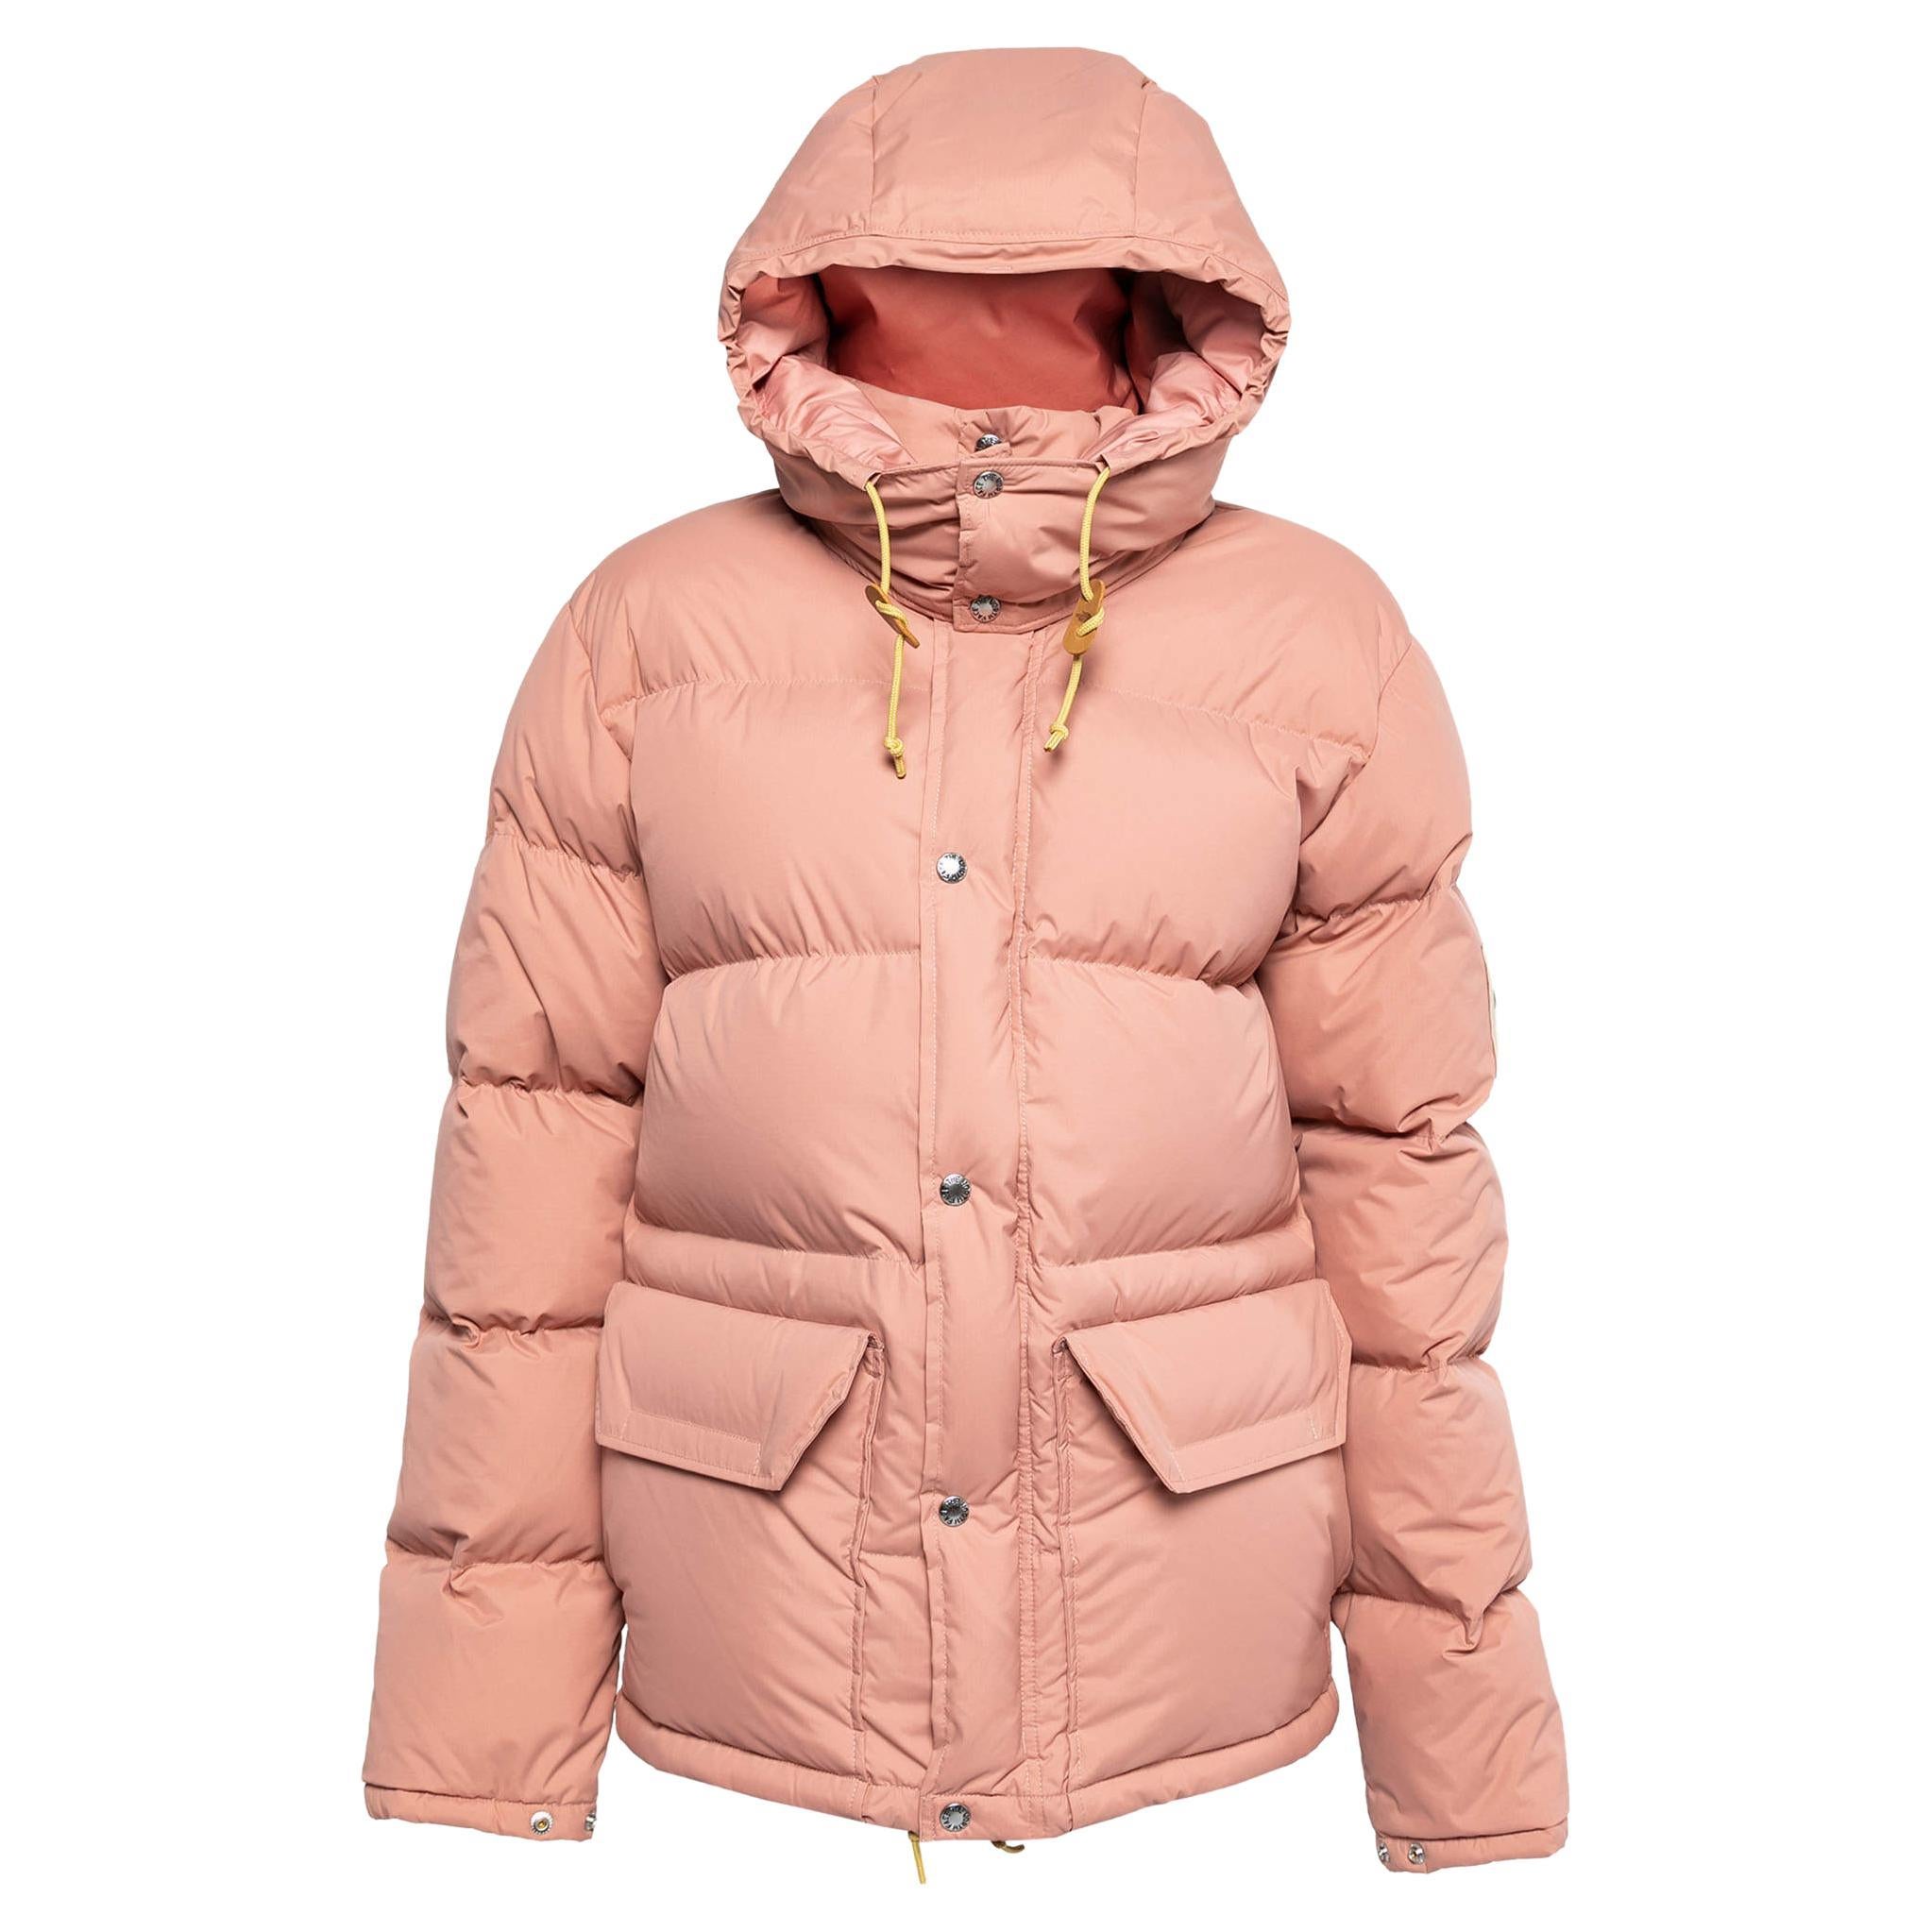 North Face X Gucci Light Pink Down Jacket S